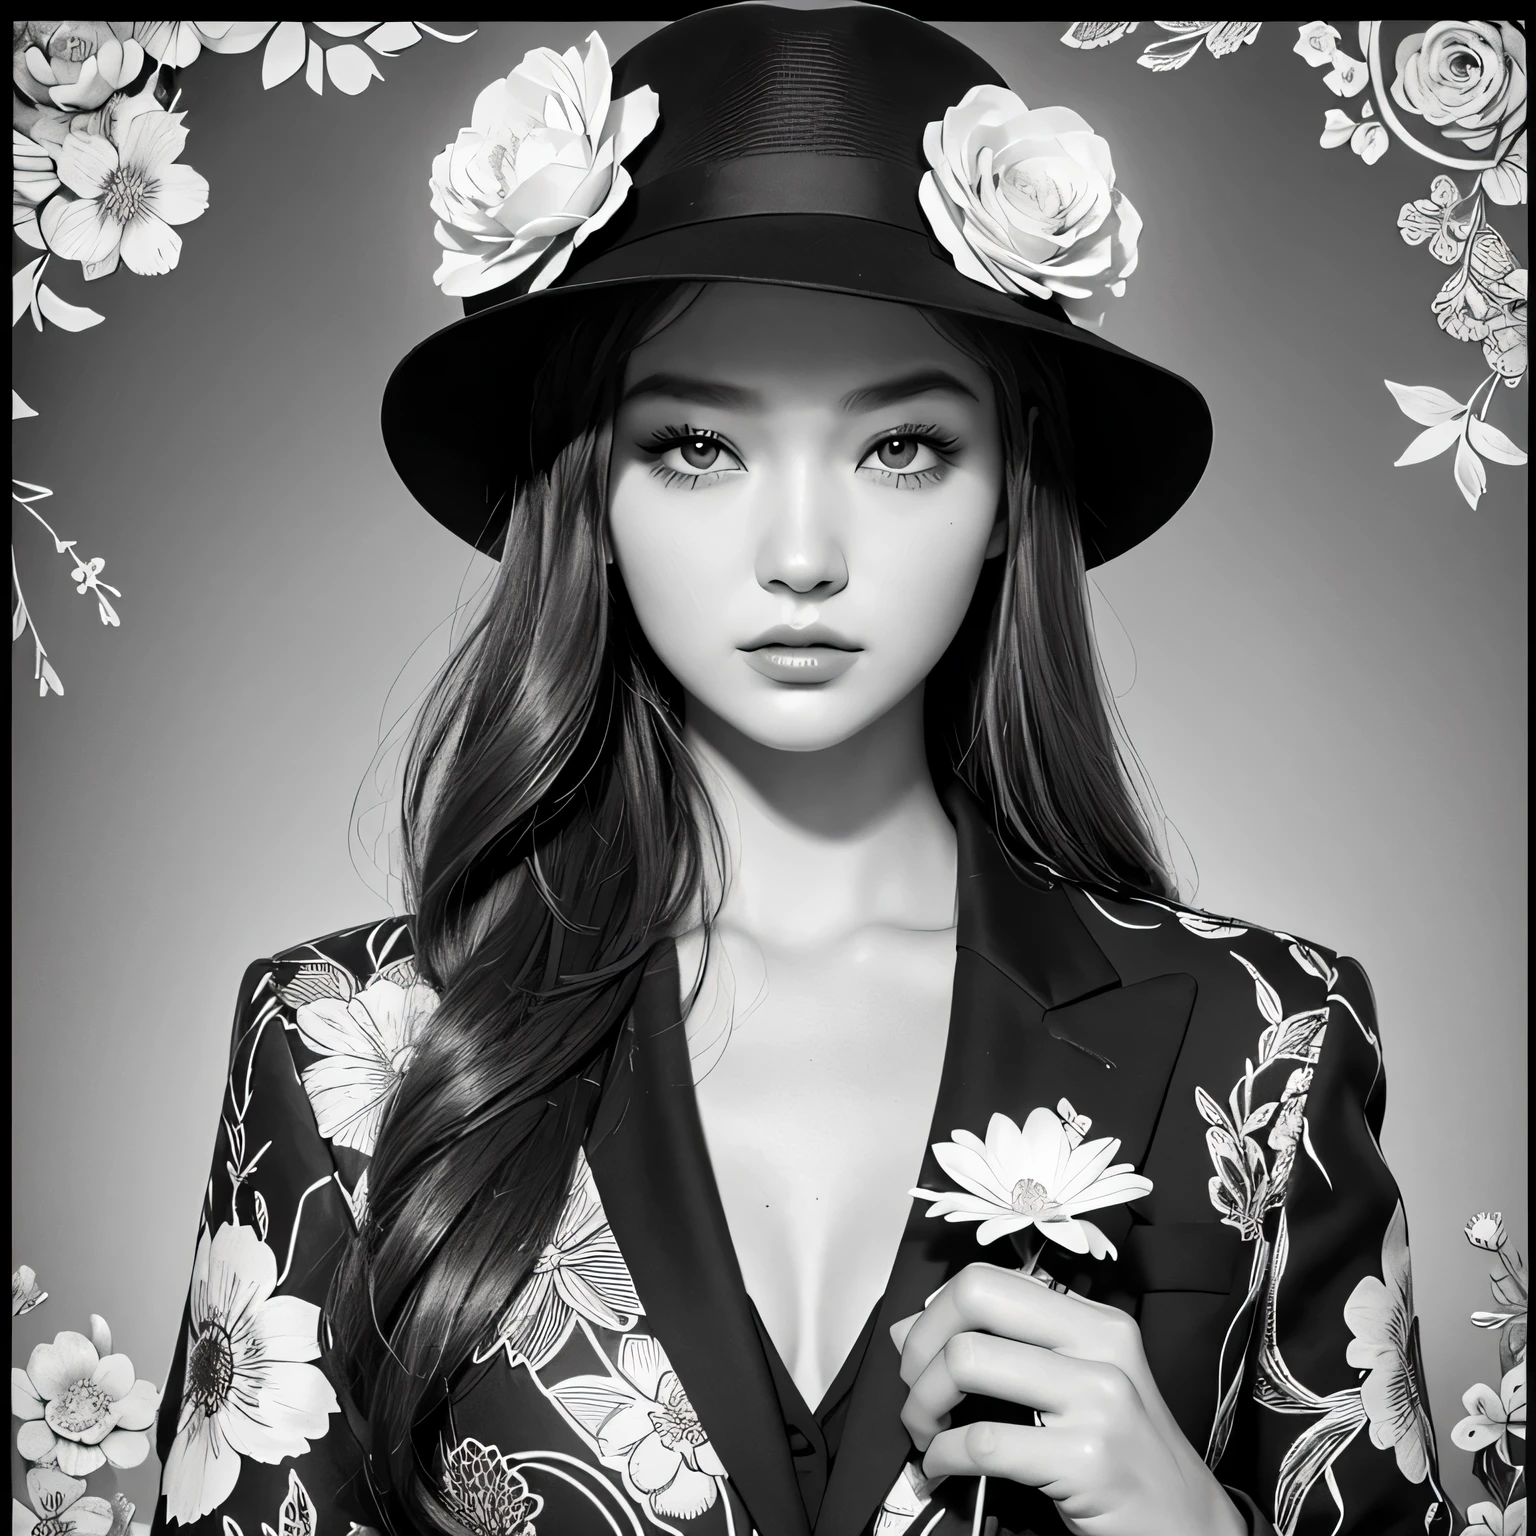 Black and white stick figure 1 girl with flowers,  lots of flowers in background, Office Suit , its fine ink line art, comic style, portrait of ploynesian girl, Gigi Hadid Hollywood glam, hand holding A GUN, Wearing Fedora Hat, beautiful line art, black and white comic style, realistic, ink drawing, black and white coloring,